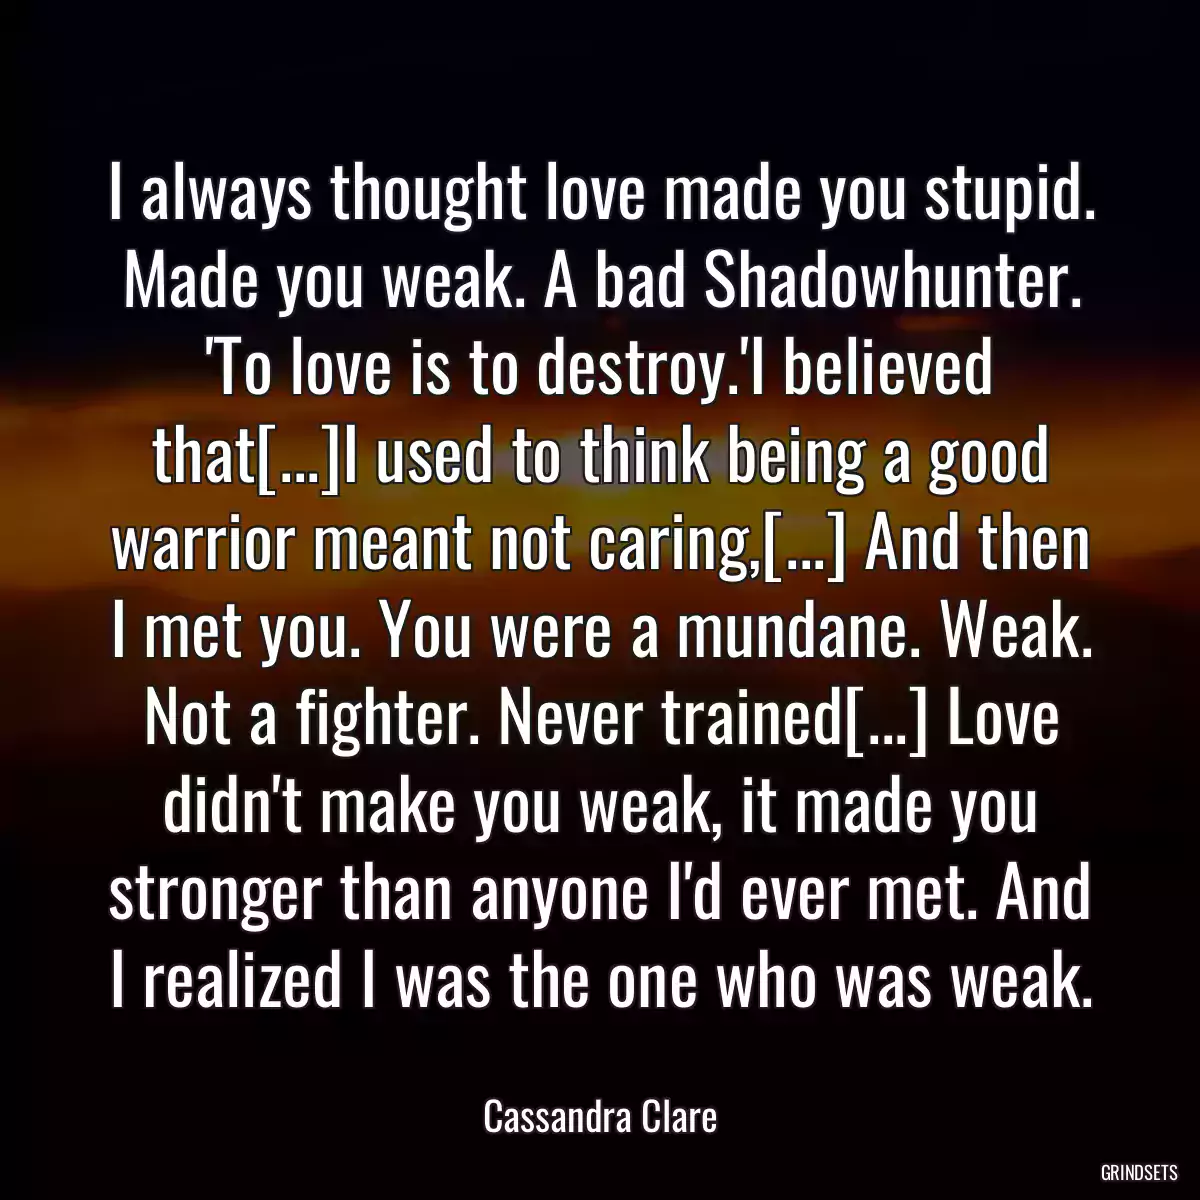 I always thought love made you stupid. Made you weak. A bad Shadowhunter. \'To love is to destroy.\'I believed that[...]I used to think being a good warrior meant not caring,[...] And then I met you. You were a mundane. Weak. Not a fighter. Never trained[...] Love didn\'t make you weak, it made you stronger than anyone I\'d ever met. And I realized I was the one who was weak.